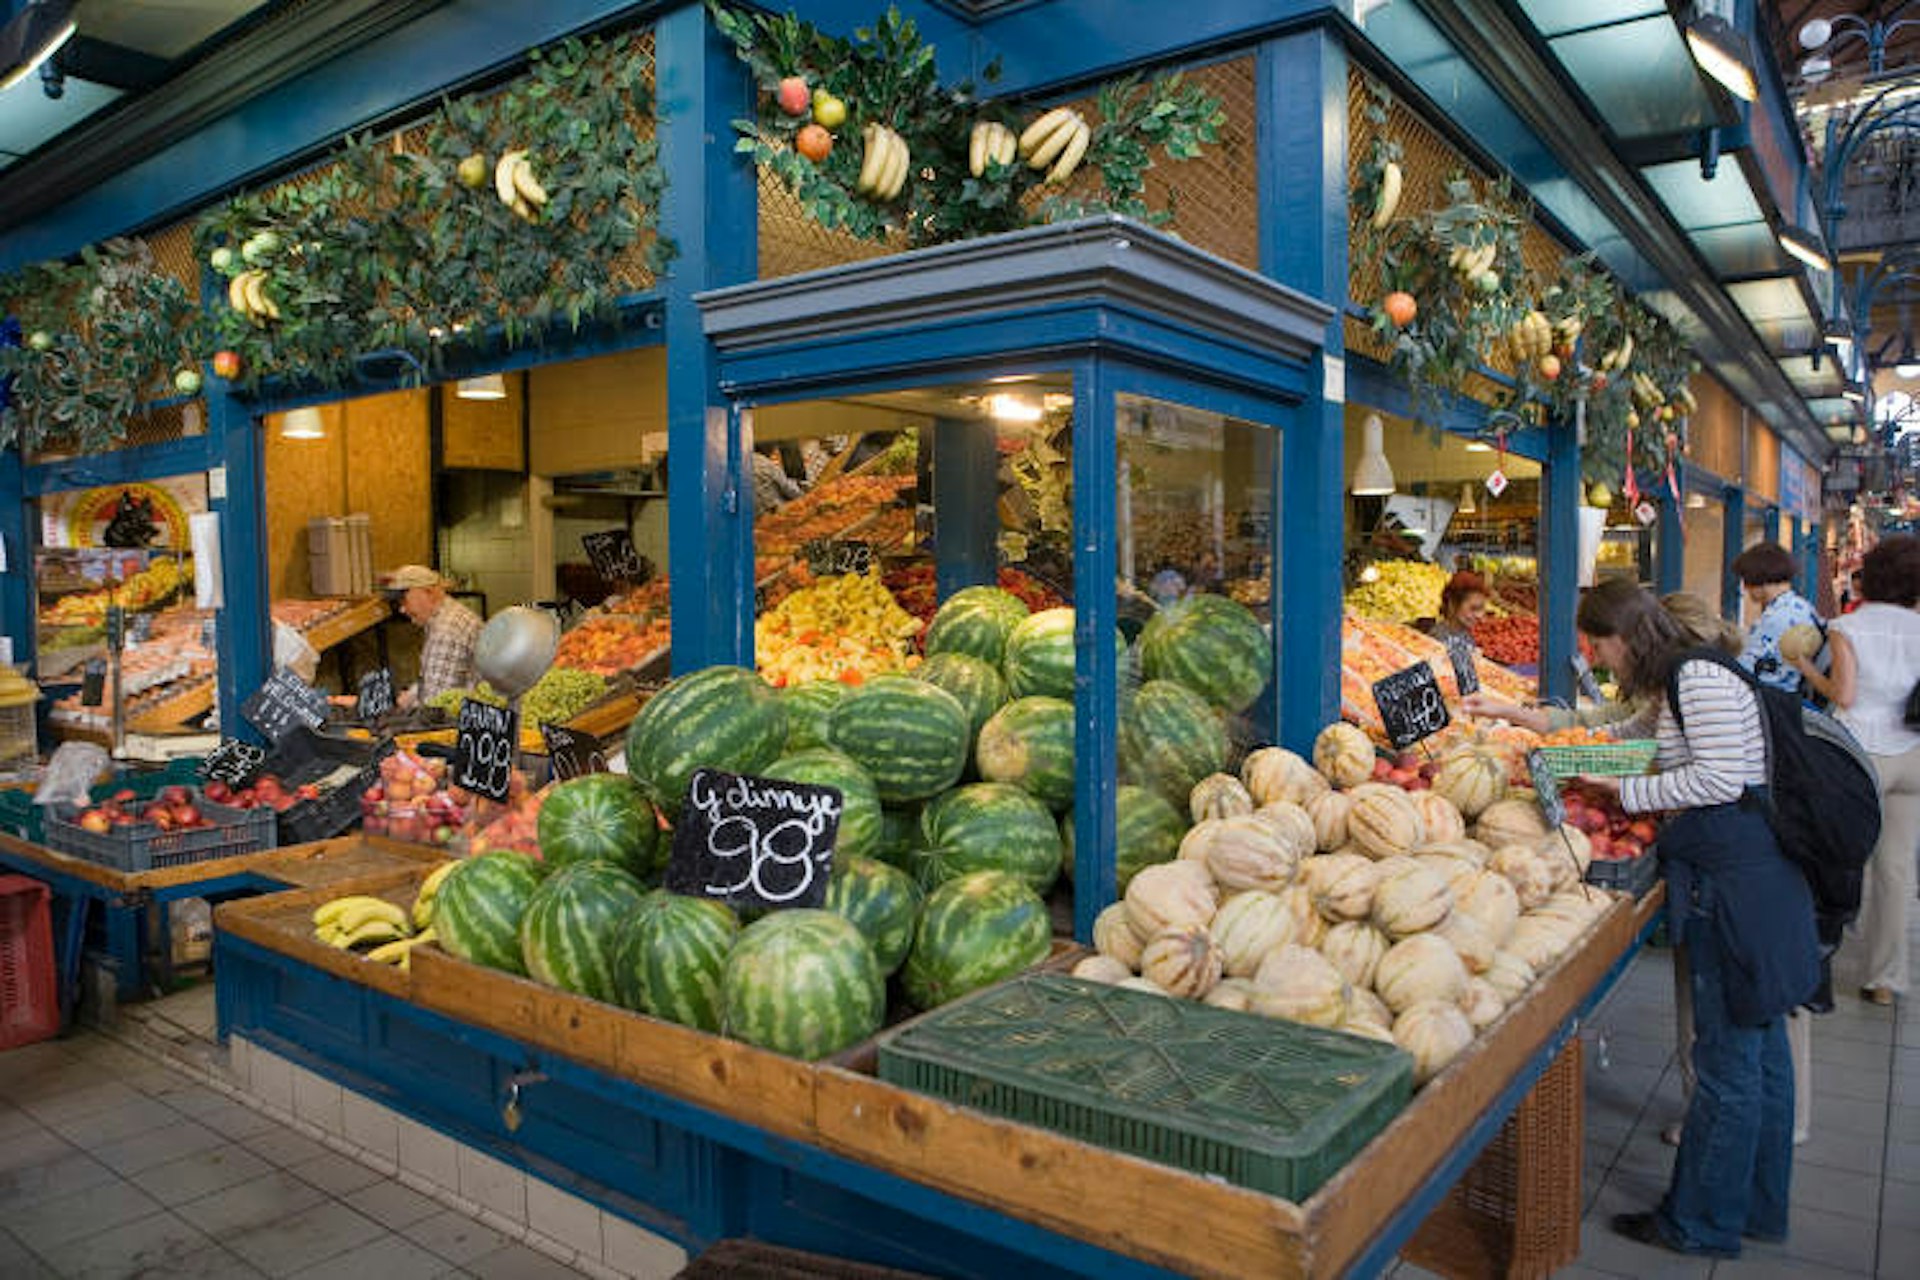 Vegetable stall at Budapest’s Central Market Hall. Image by Holger Leue / Lonely Planet Images / Getty Images